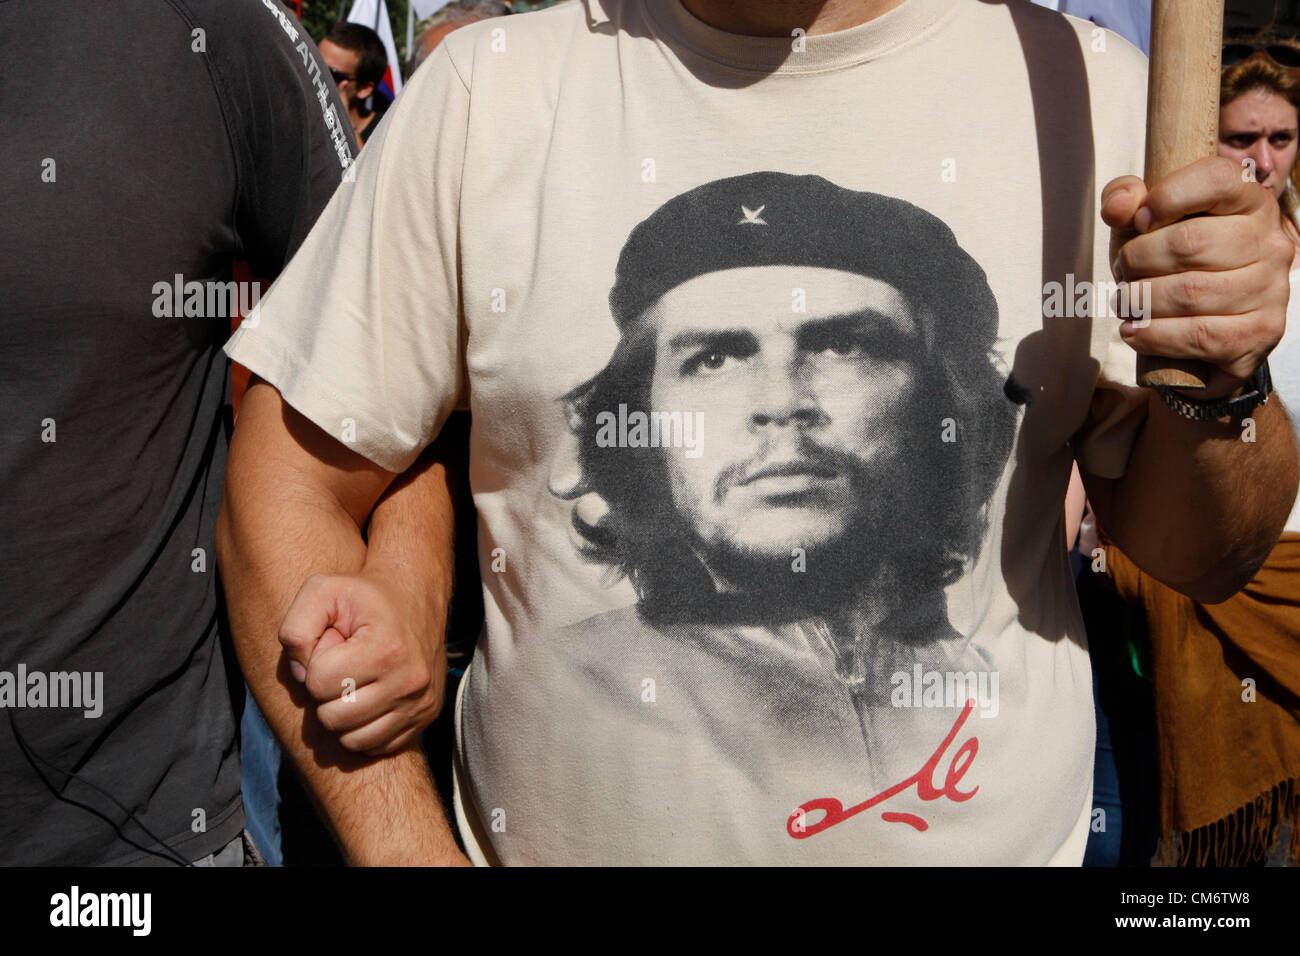 Young man with thiny dreadlock with red T shirt with Ernesto Che Guevara  Stock Photo - Alamy